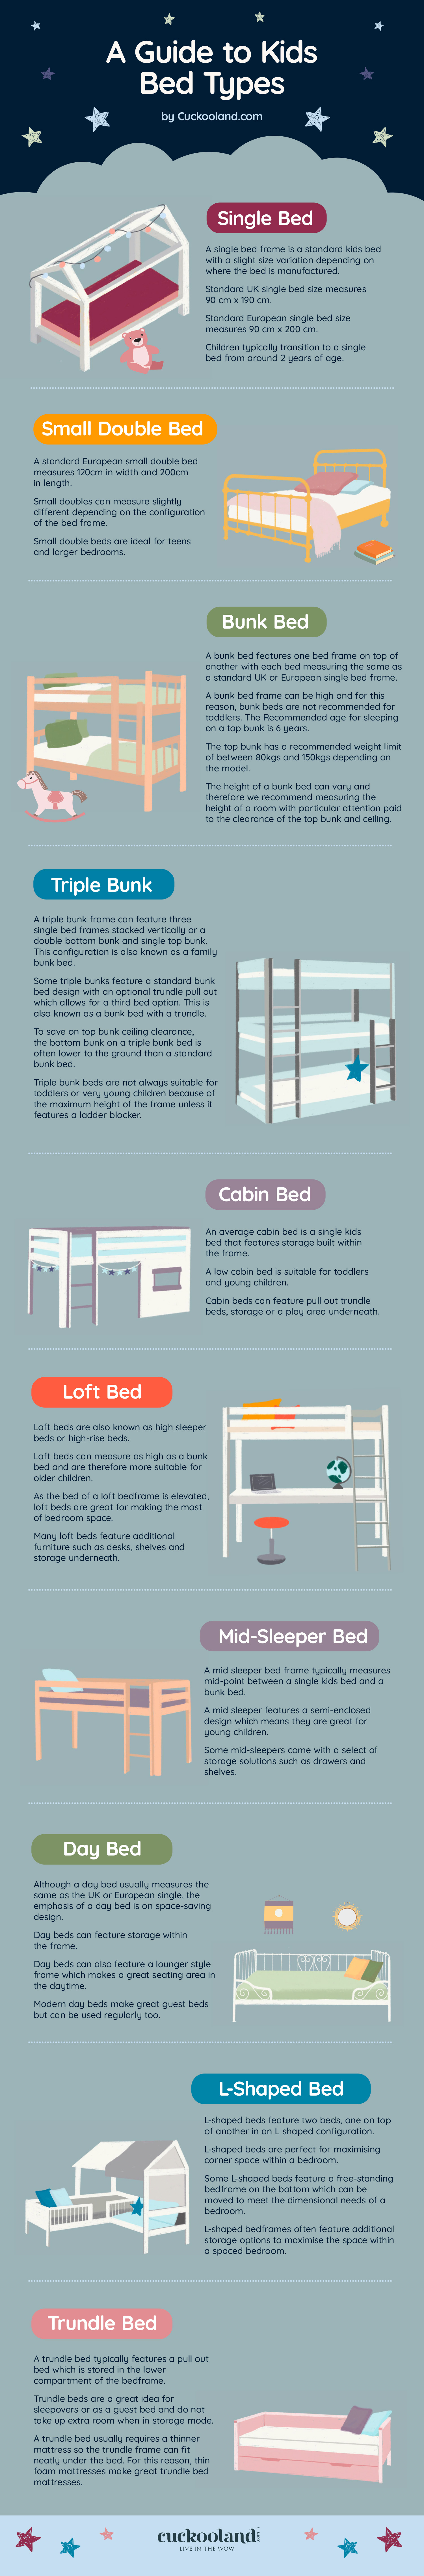 kids bed type infographic